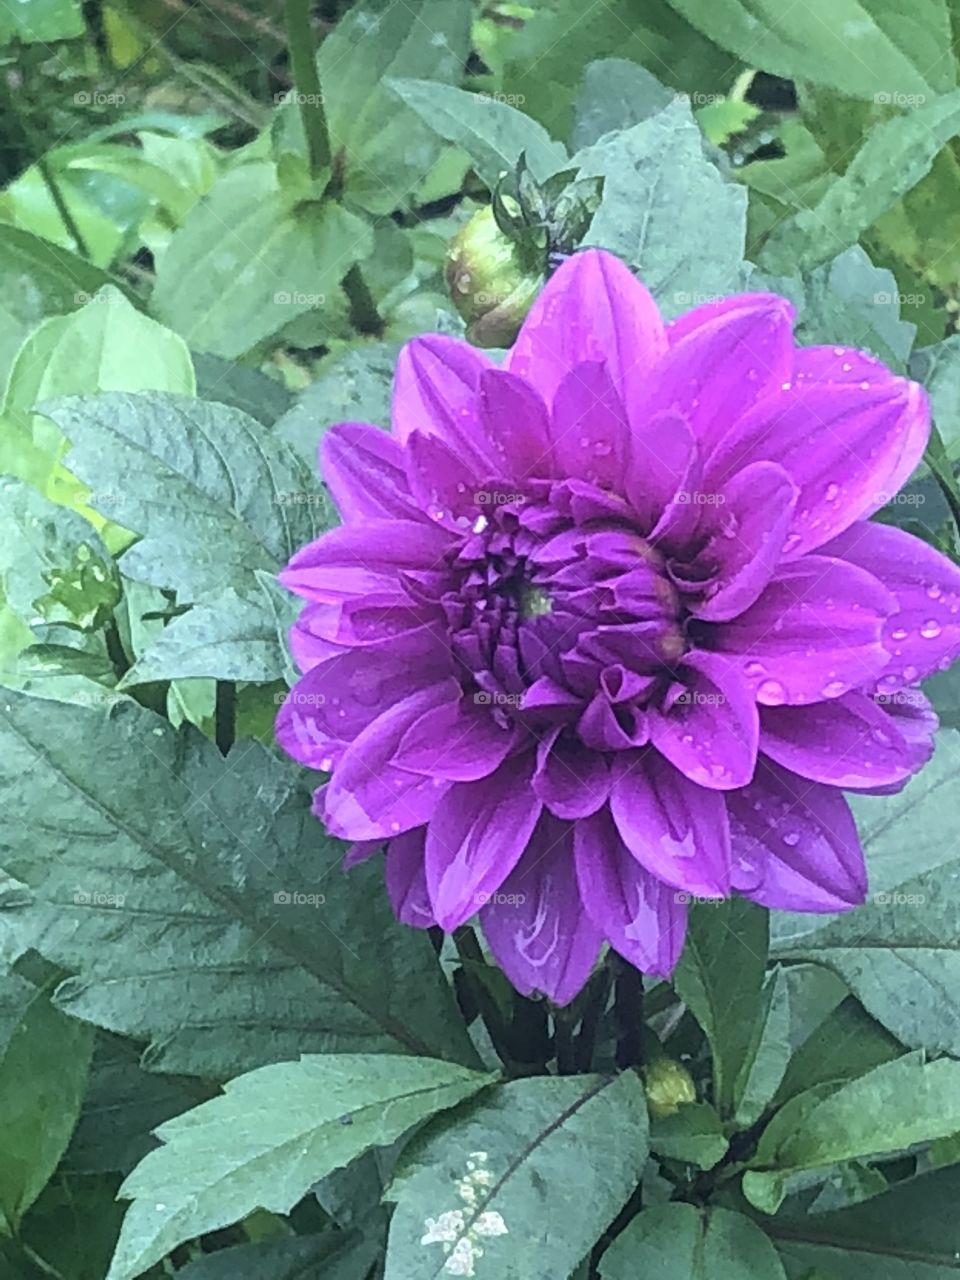 Beautiful, bright purple flower in bloom on a rainy day. Image was taken at the Brooklyn Botanical Gardens in Brooklyn, New York, during the fall. 